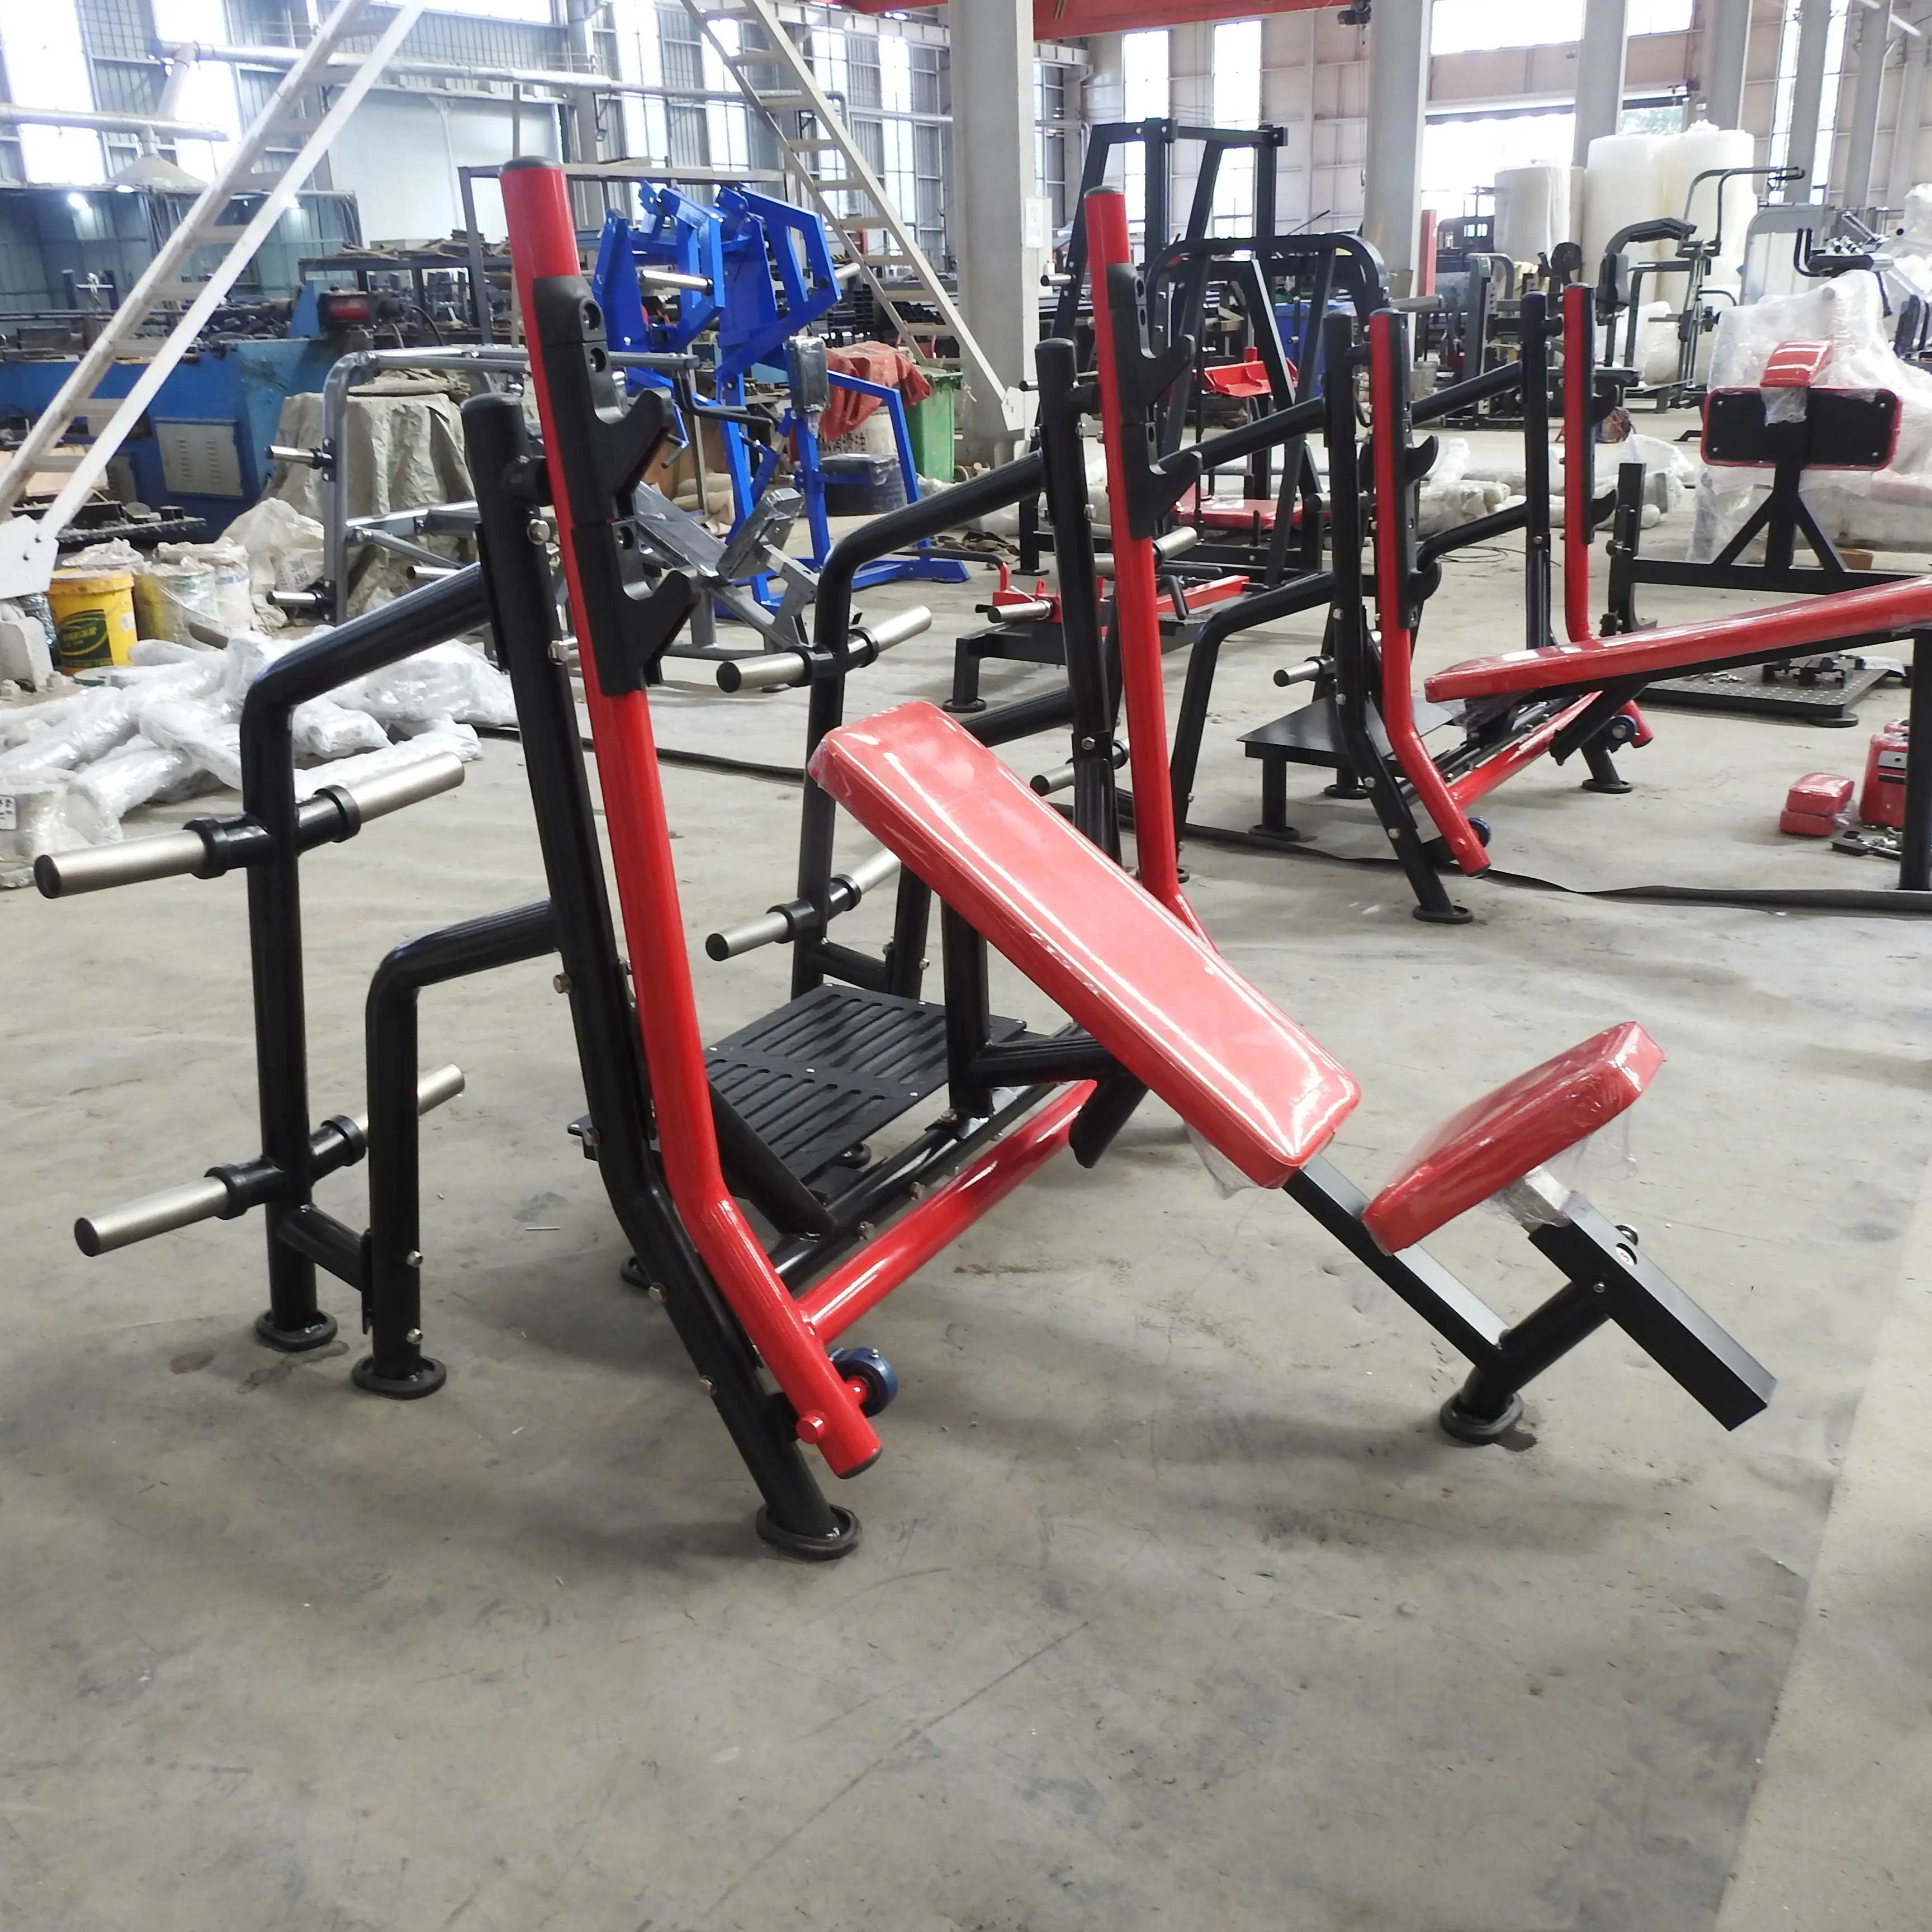 Gym MAGNUM Breaker Benches Matrix Benches Fitness Incline Bench Press